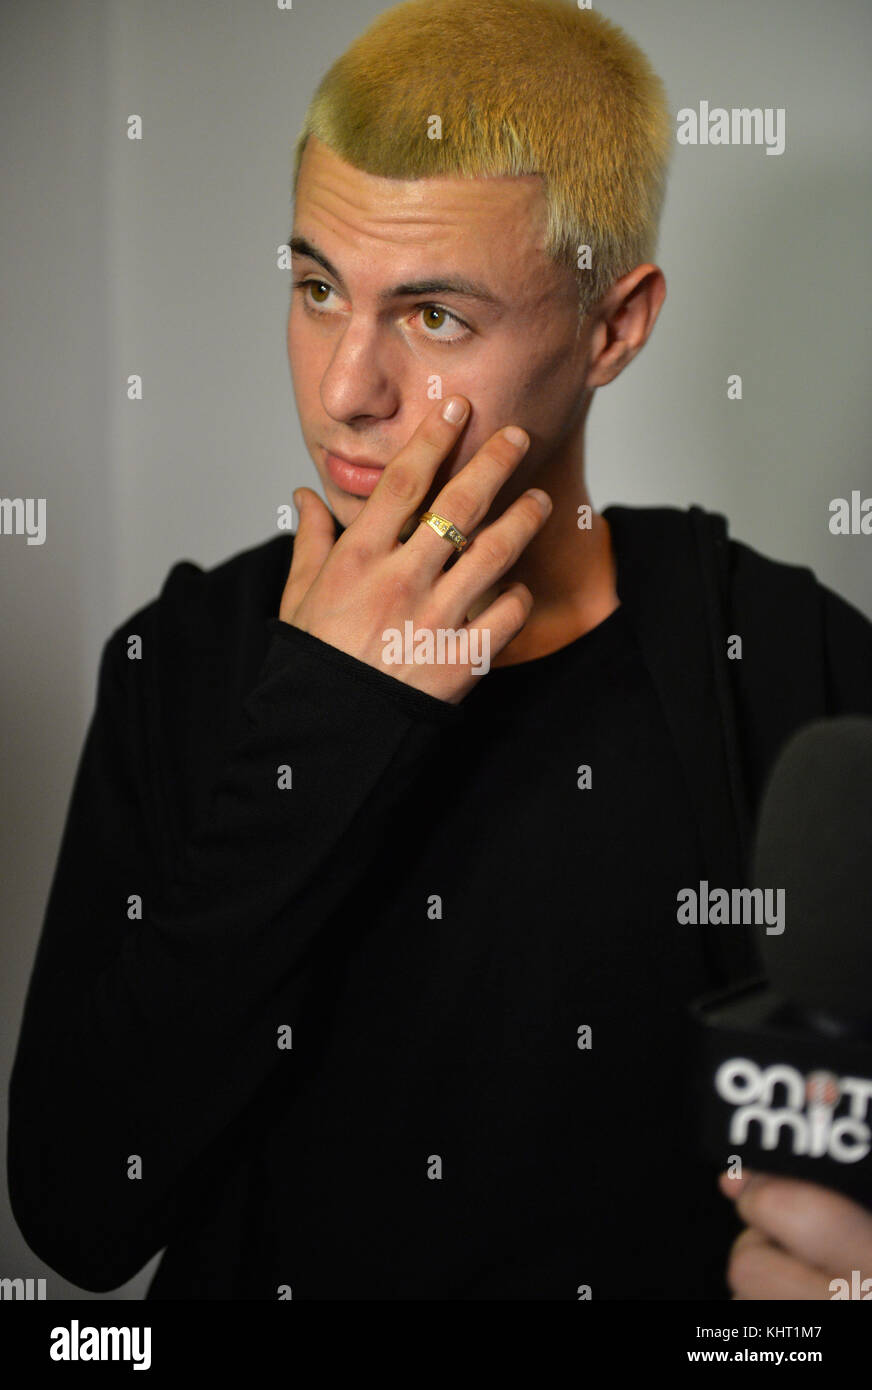 MIAMI , FL - AUGUST 08: (EXCLUSIVE COVERAGE) 20-year-old Eric Leon has emerged as a young gun on the hip hop scene and has been referred to as the next Eminem. He dropped his self-titled mixtape with DJ Khaled at an exclusive launch party tonight  hosted by Grammy Award-winning producers Cool & Dre at Universal Miami Studios on August 08, 2017 in Miami Beach, Florida  People:  Eric Leon Stock Photo